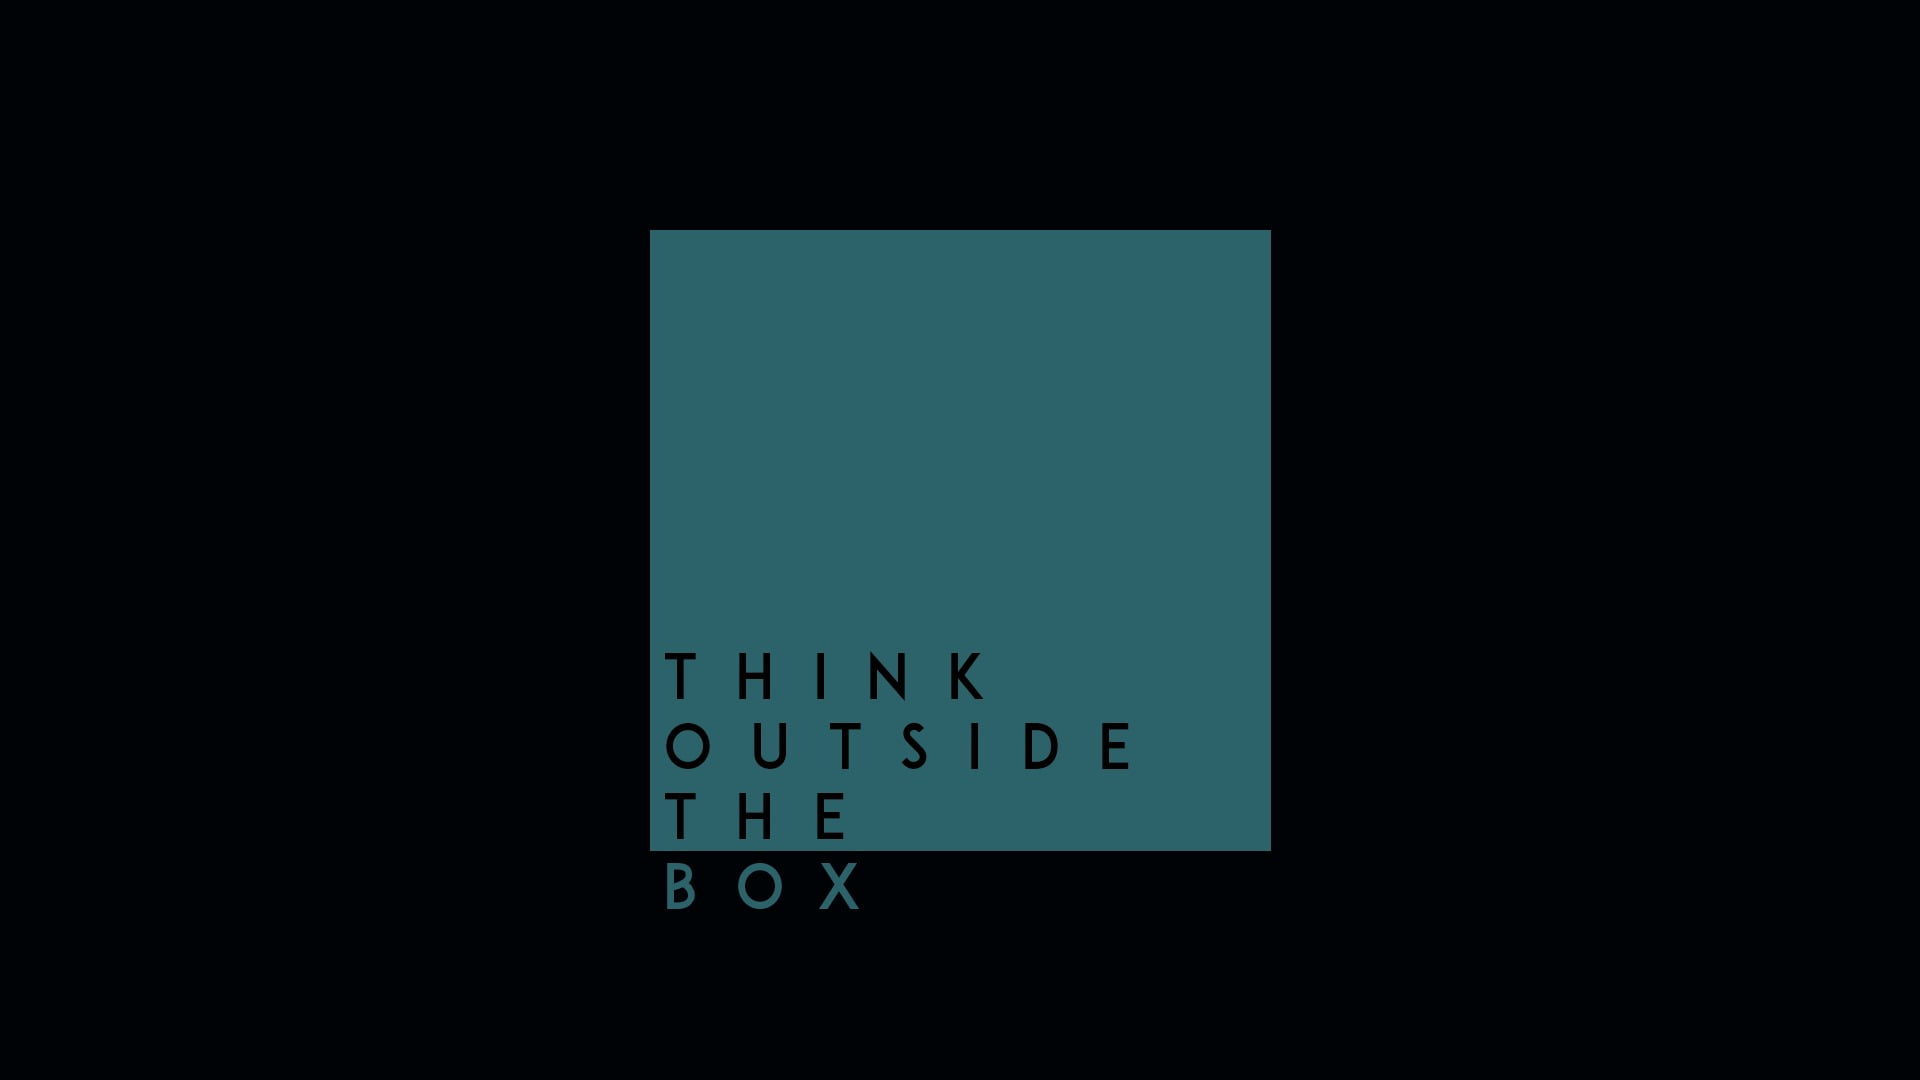 Think Outside The Box, simple background, motivational, quote